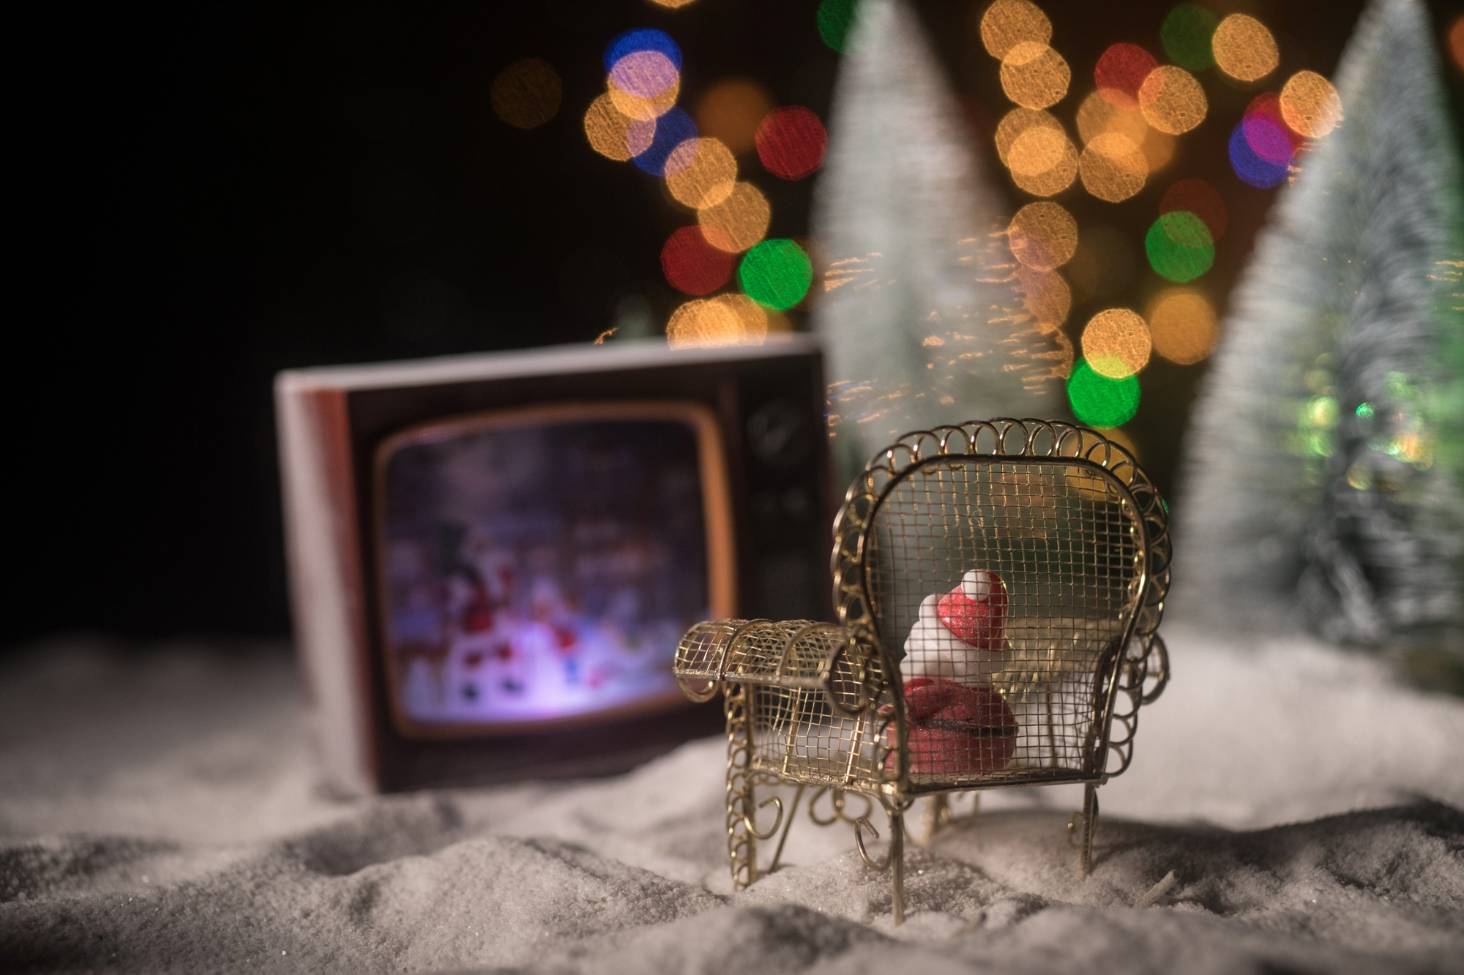 Which Country Has Officially Banned All Forms Of Television Advertising On Christmas Day?